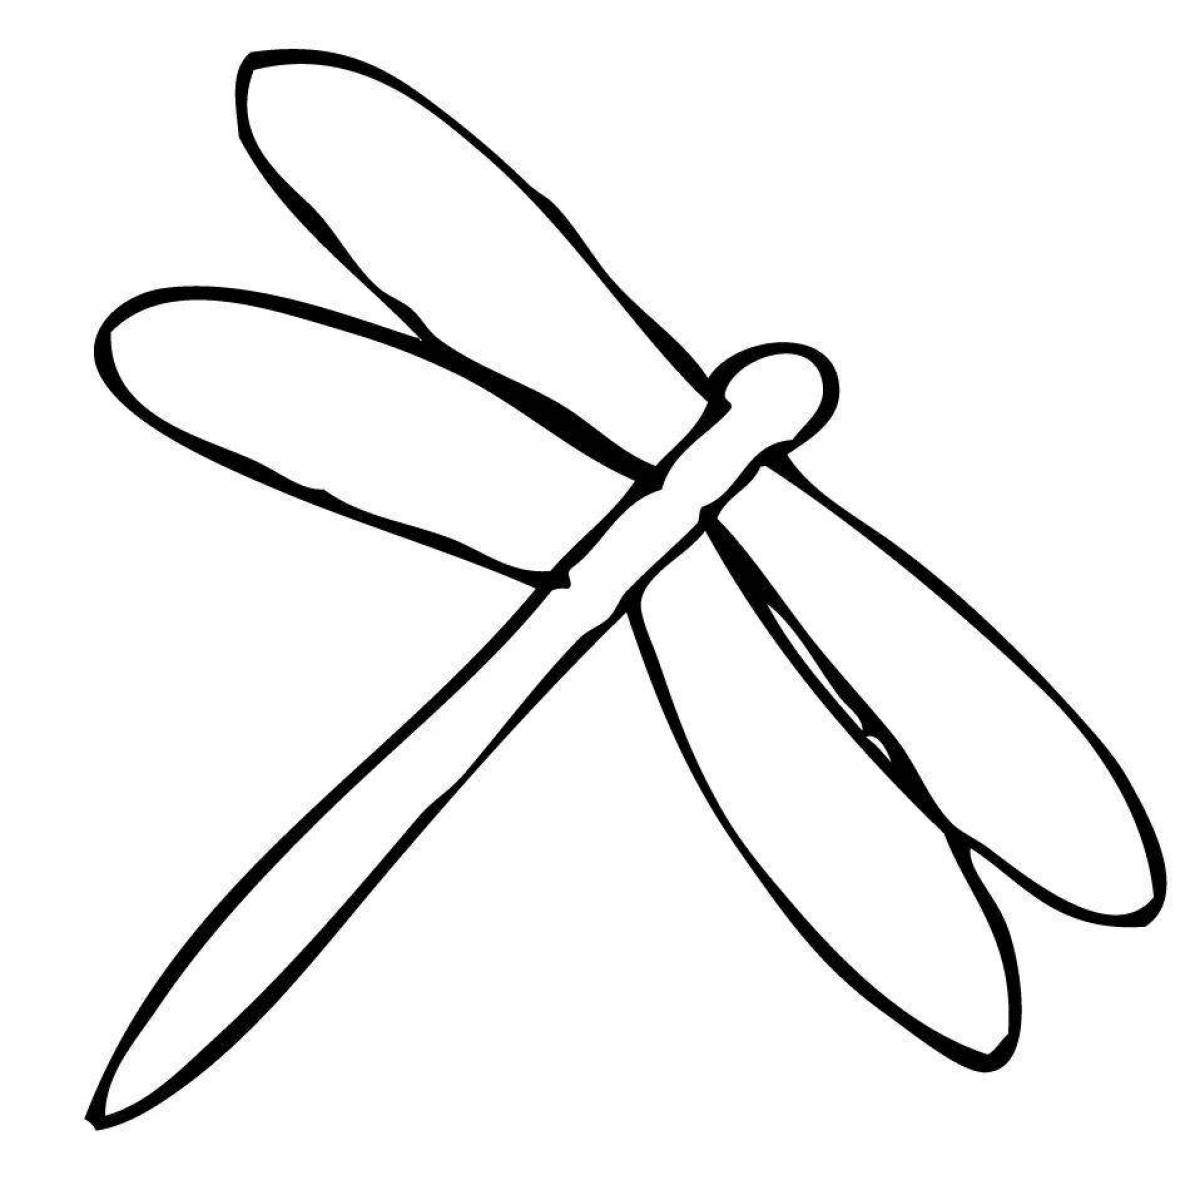 Amazing dragonfly coloring page for kids